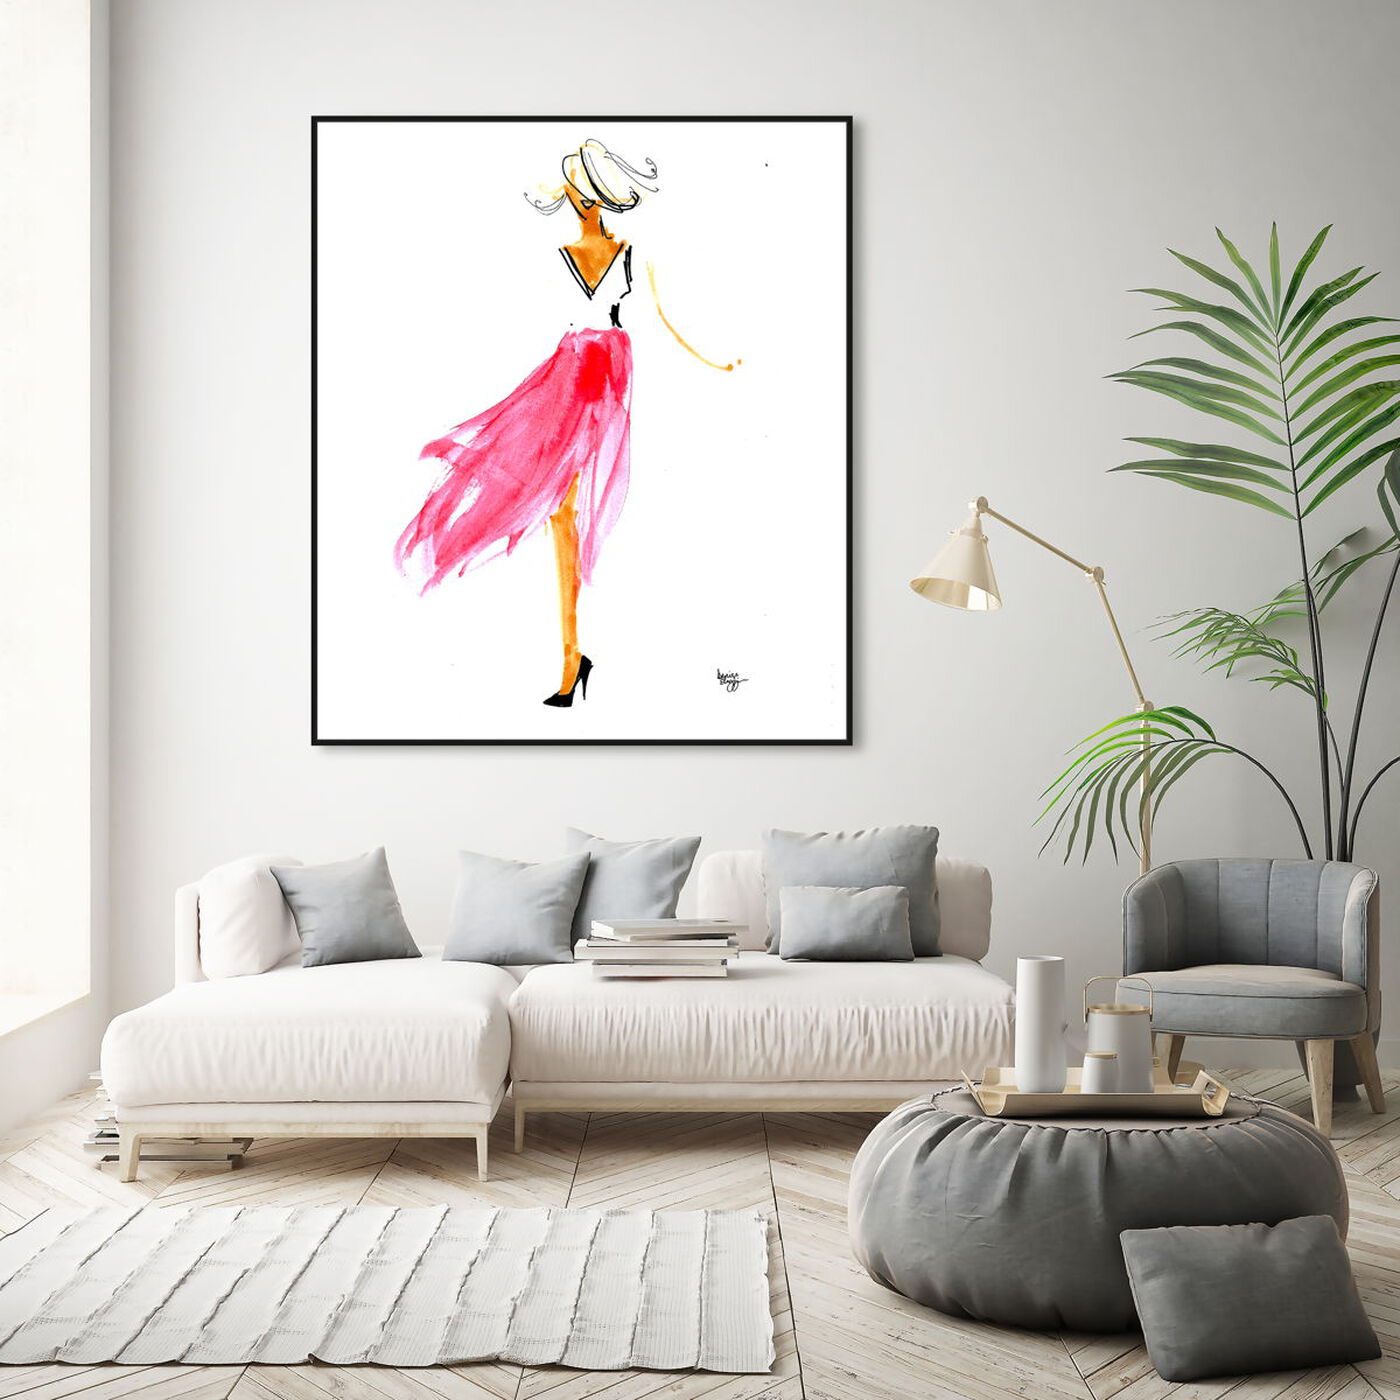 Hanging view of Denise Elnajjar - Breeze featuring fashion and glam and dress art.